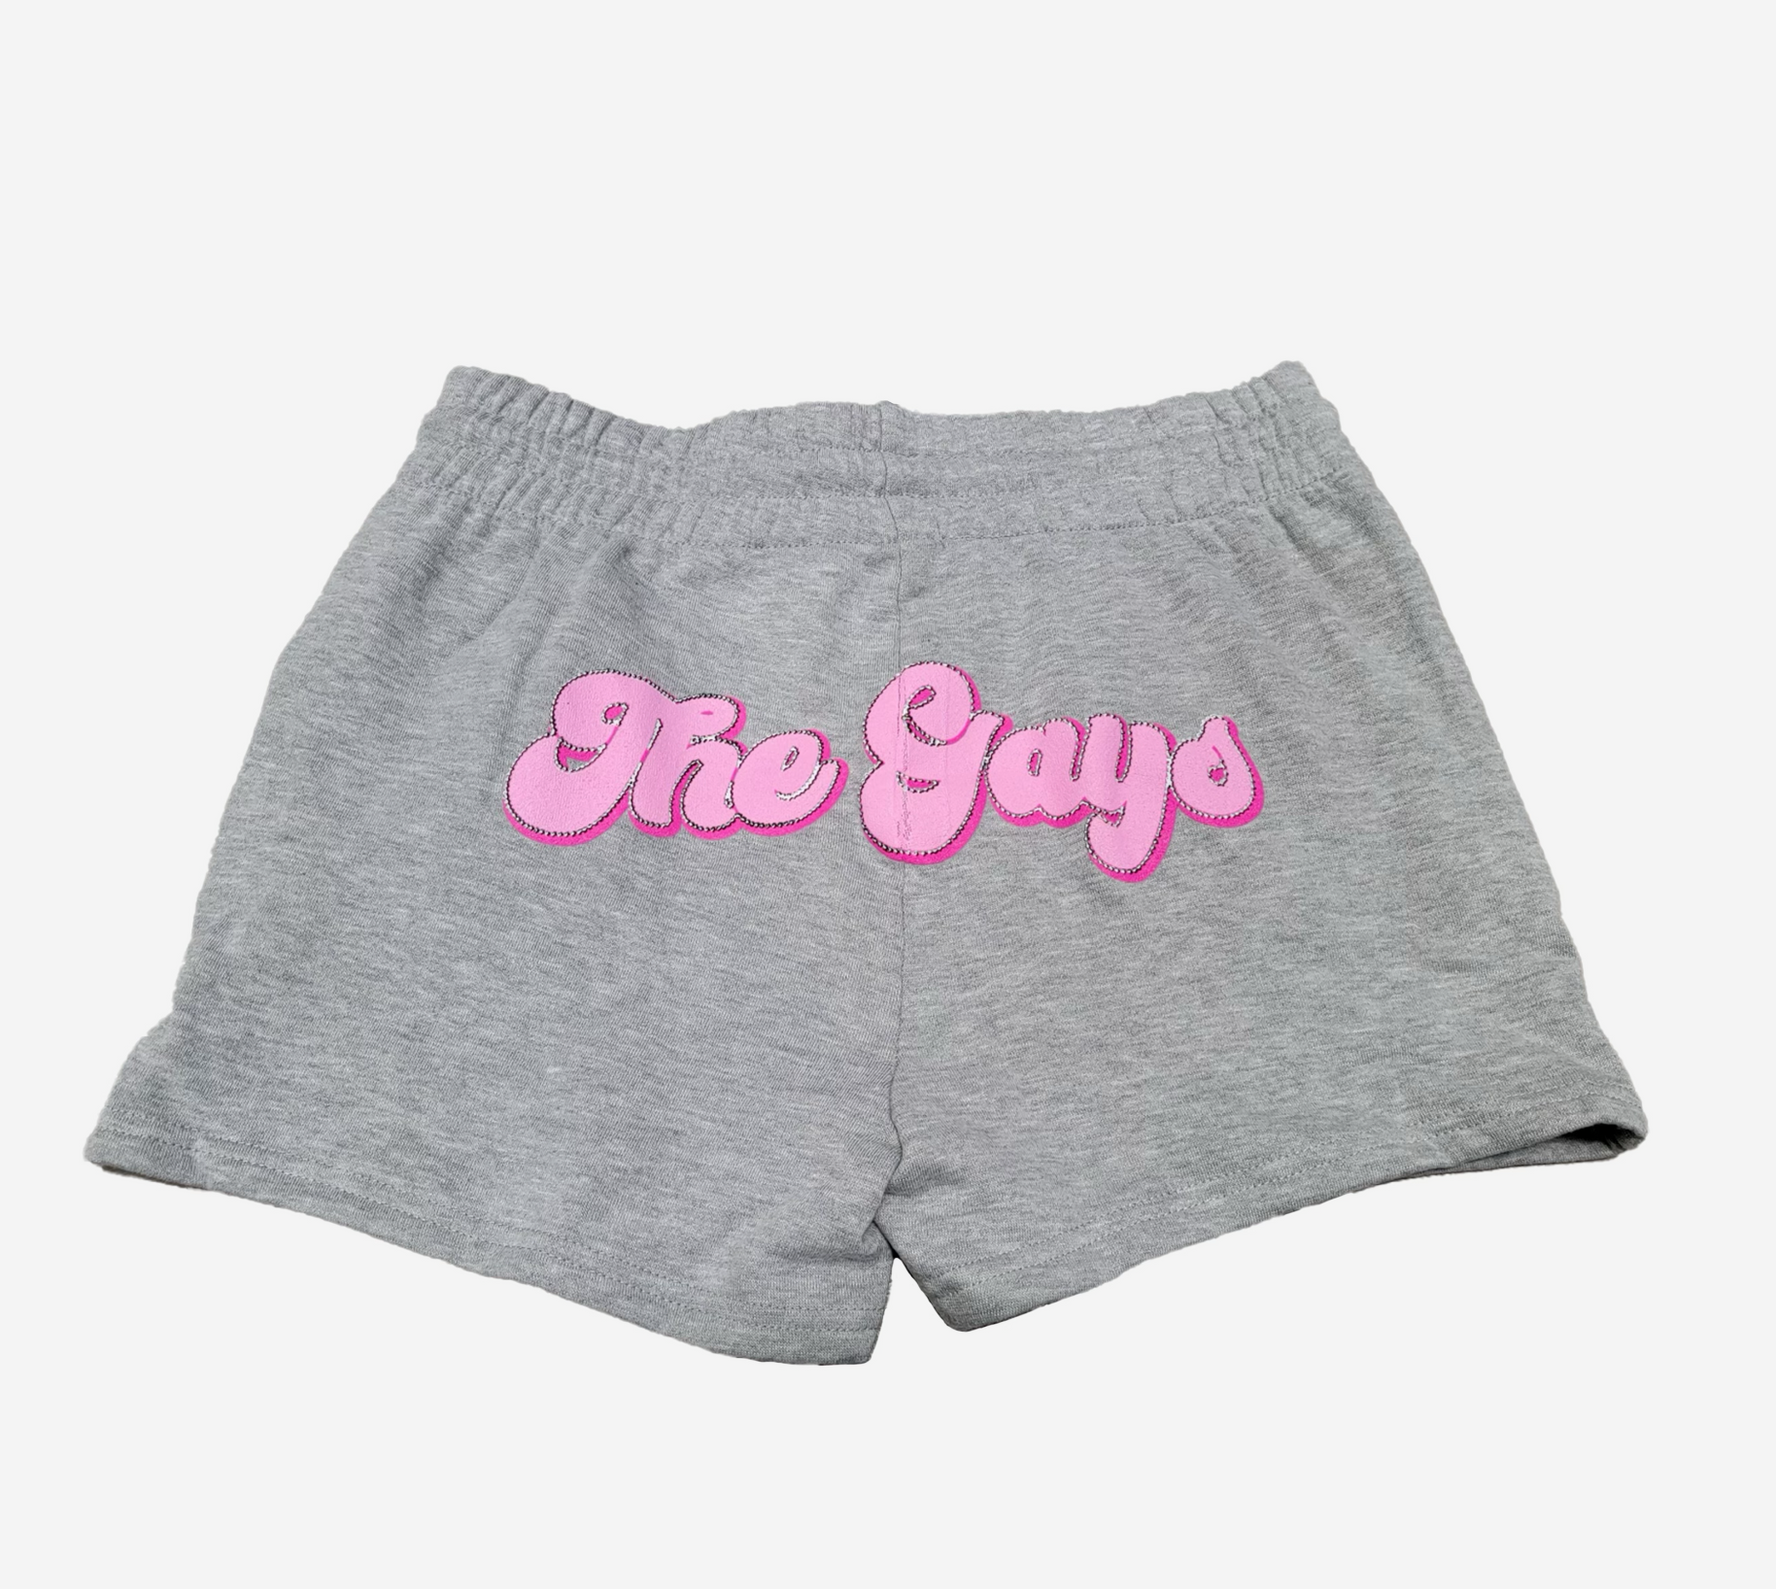 "The Gays" Shorts